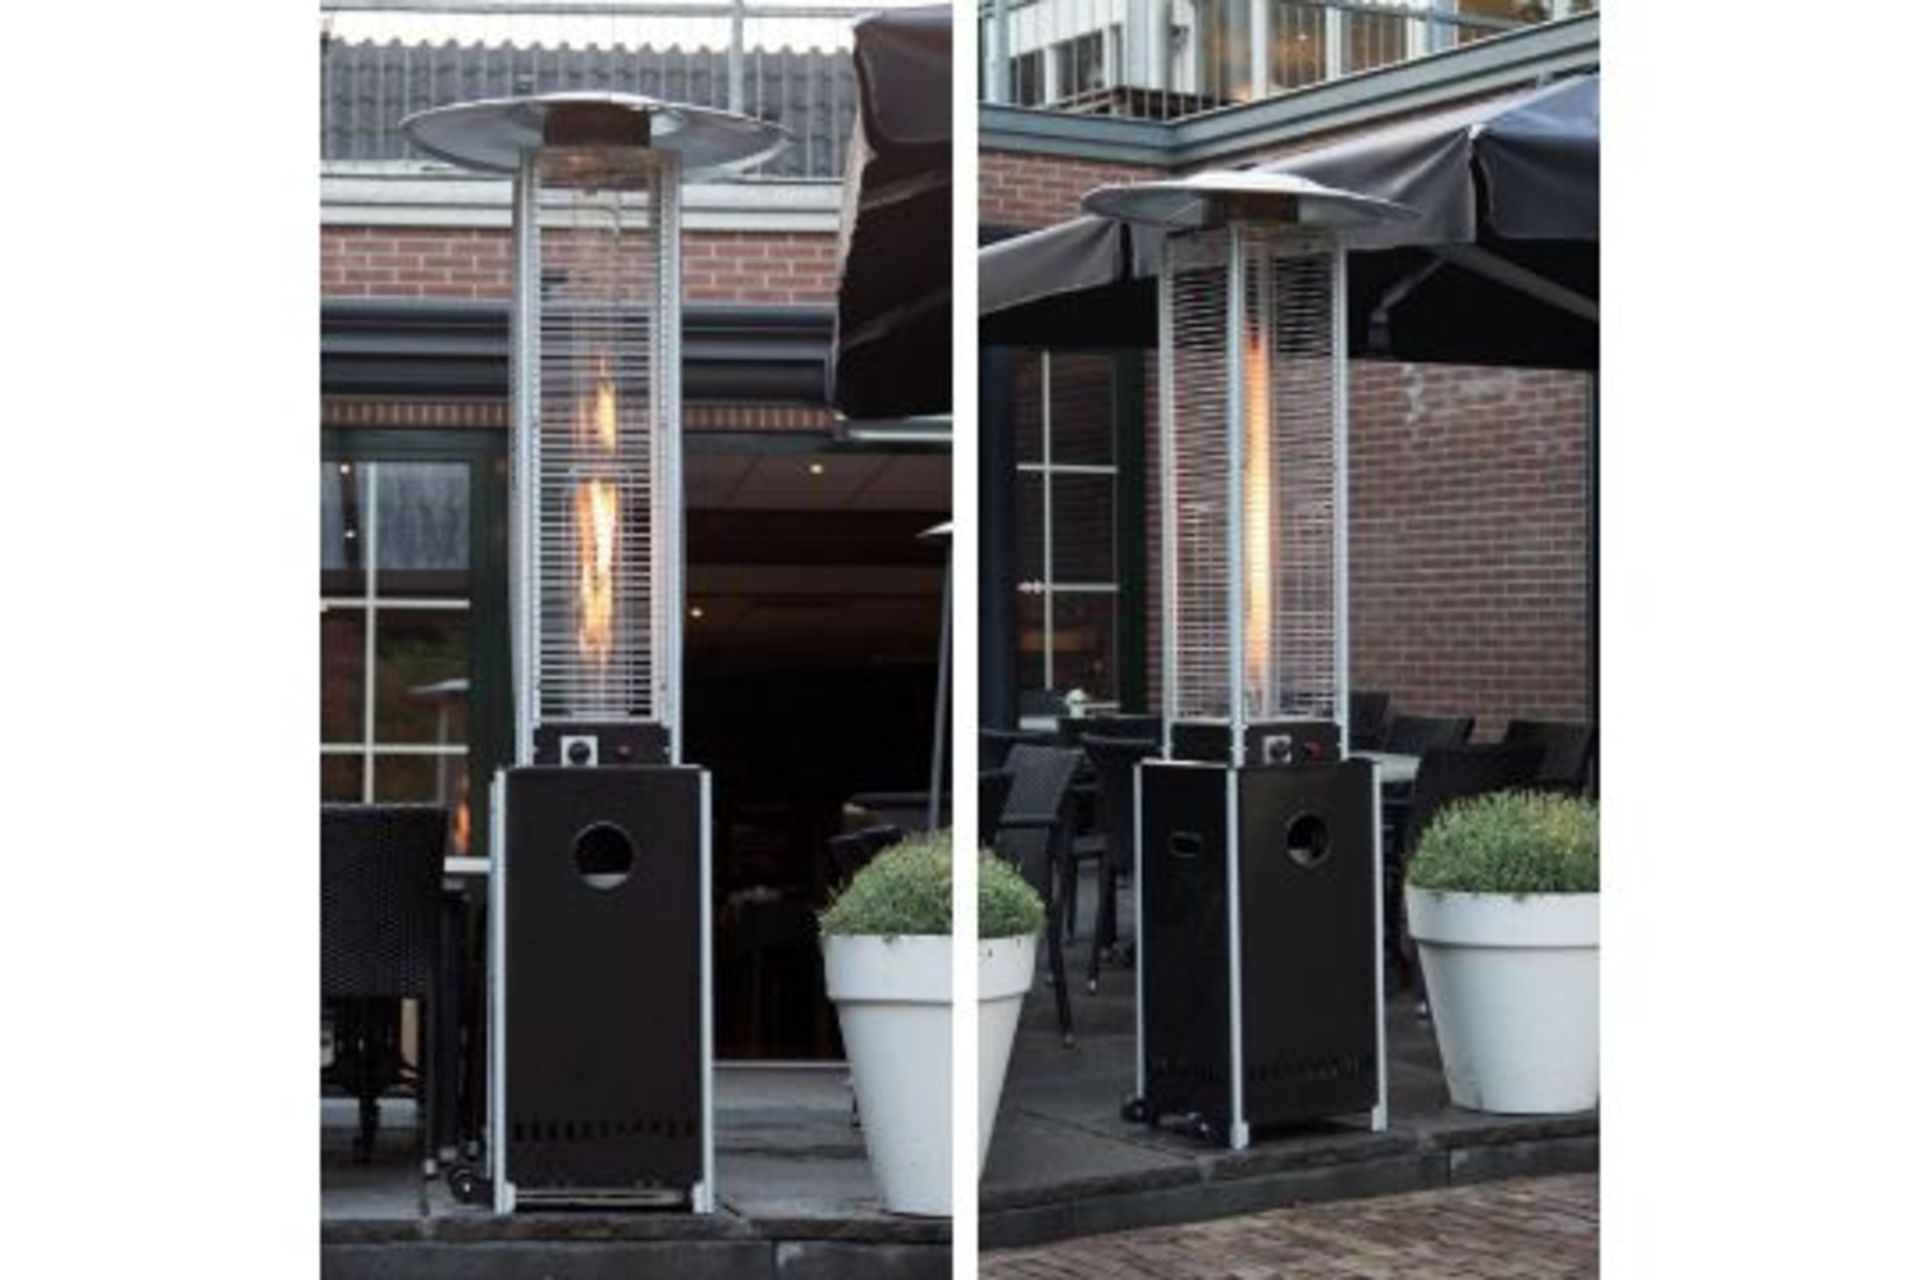 BRAND NEW SUNRED FLAMETORCH PATIO HEATER RRP £559. UPTO 12000 WATT, WITH WHEELS, WITH HOHSE AND - Image 3 of 3